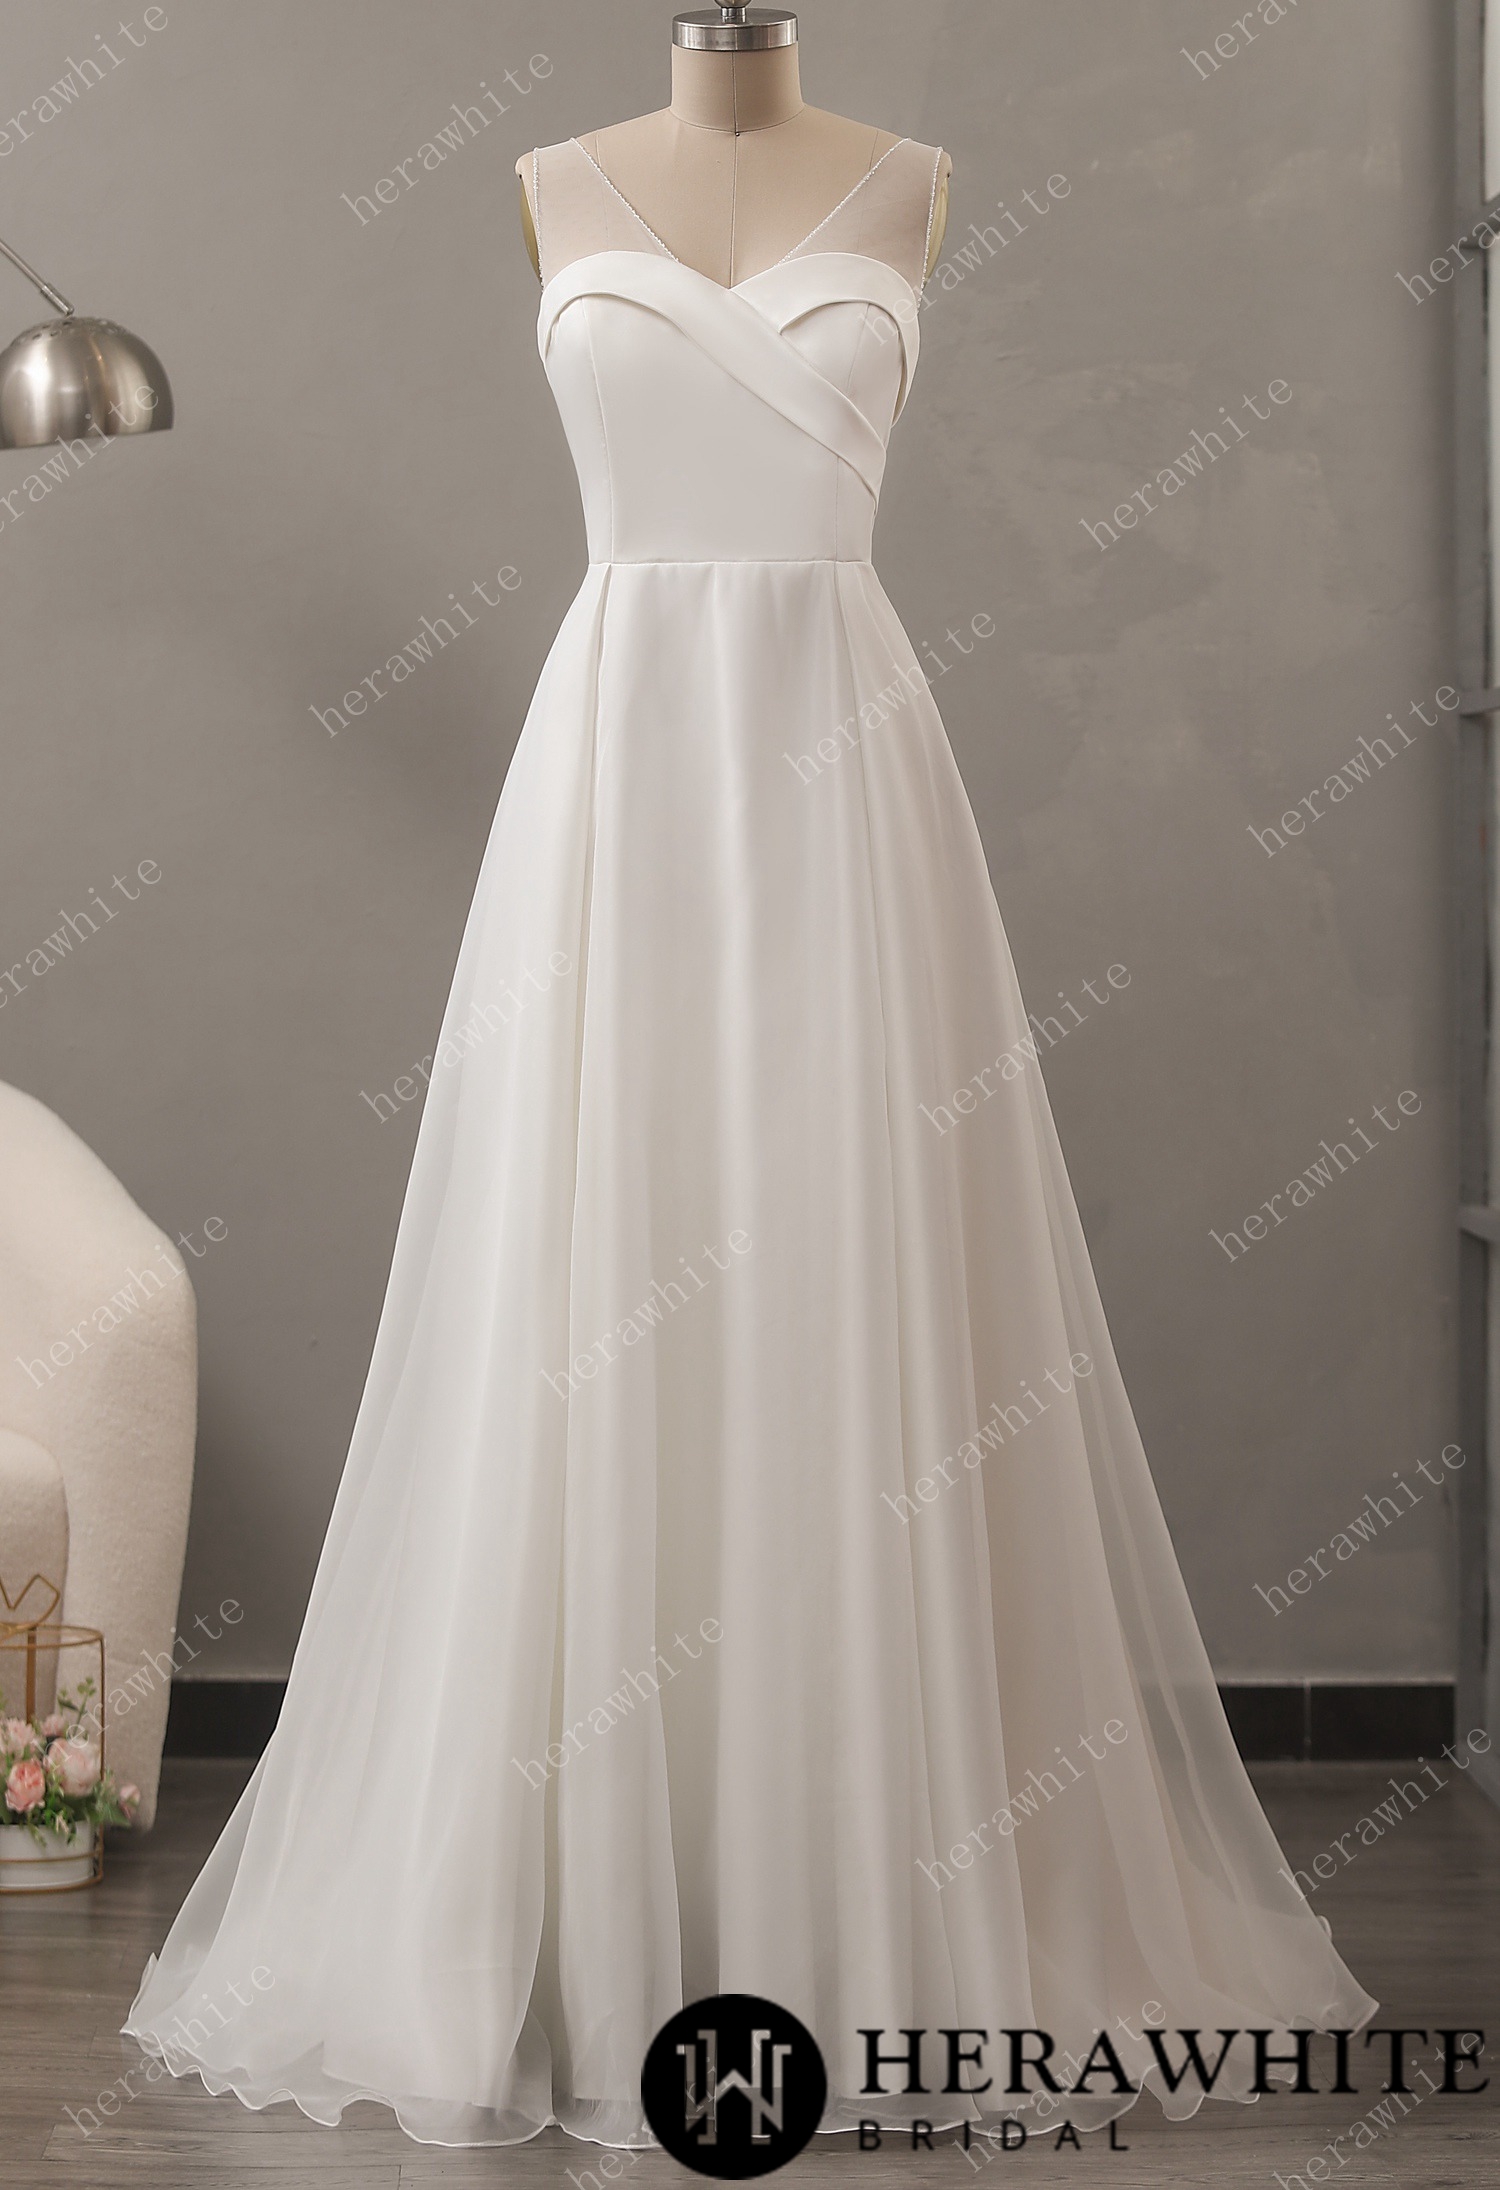 Elegant A-Line with Organza Skirt and V-neck